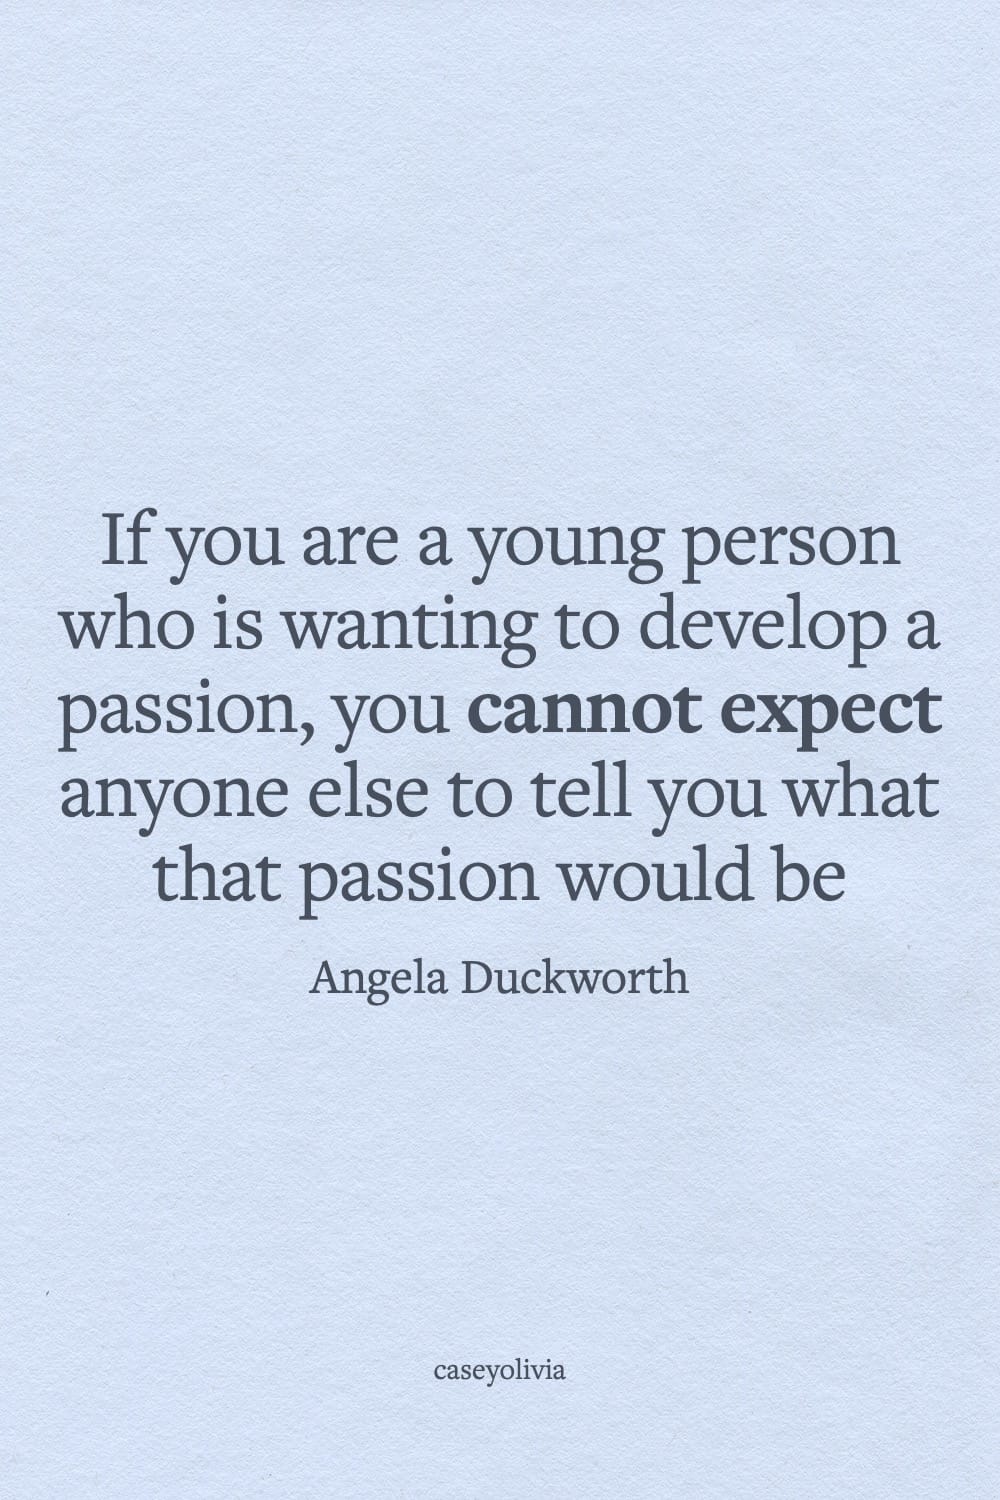 angela duckworth developing a passion quote for students